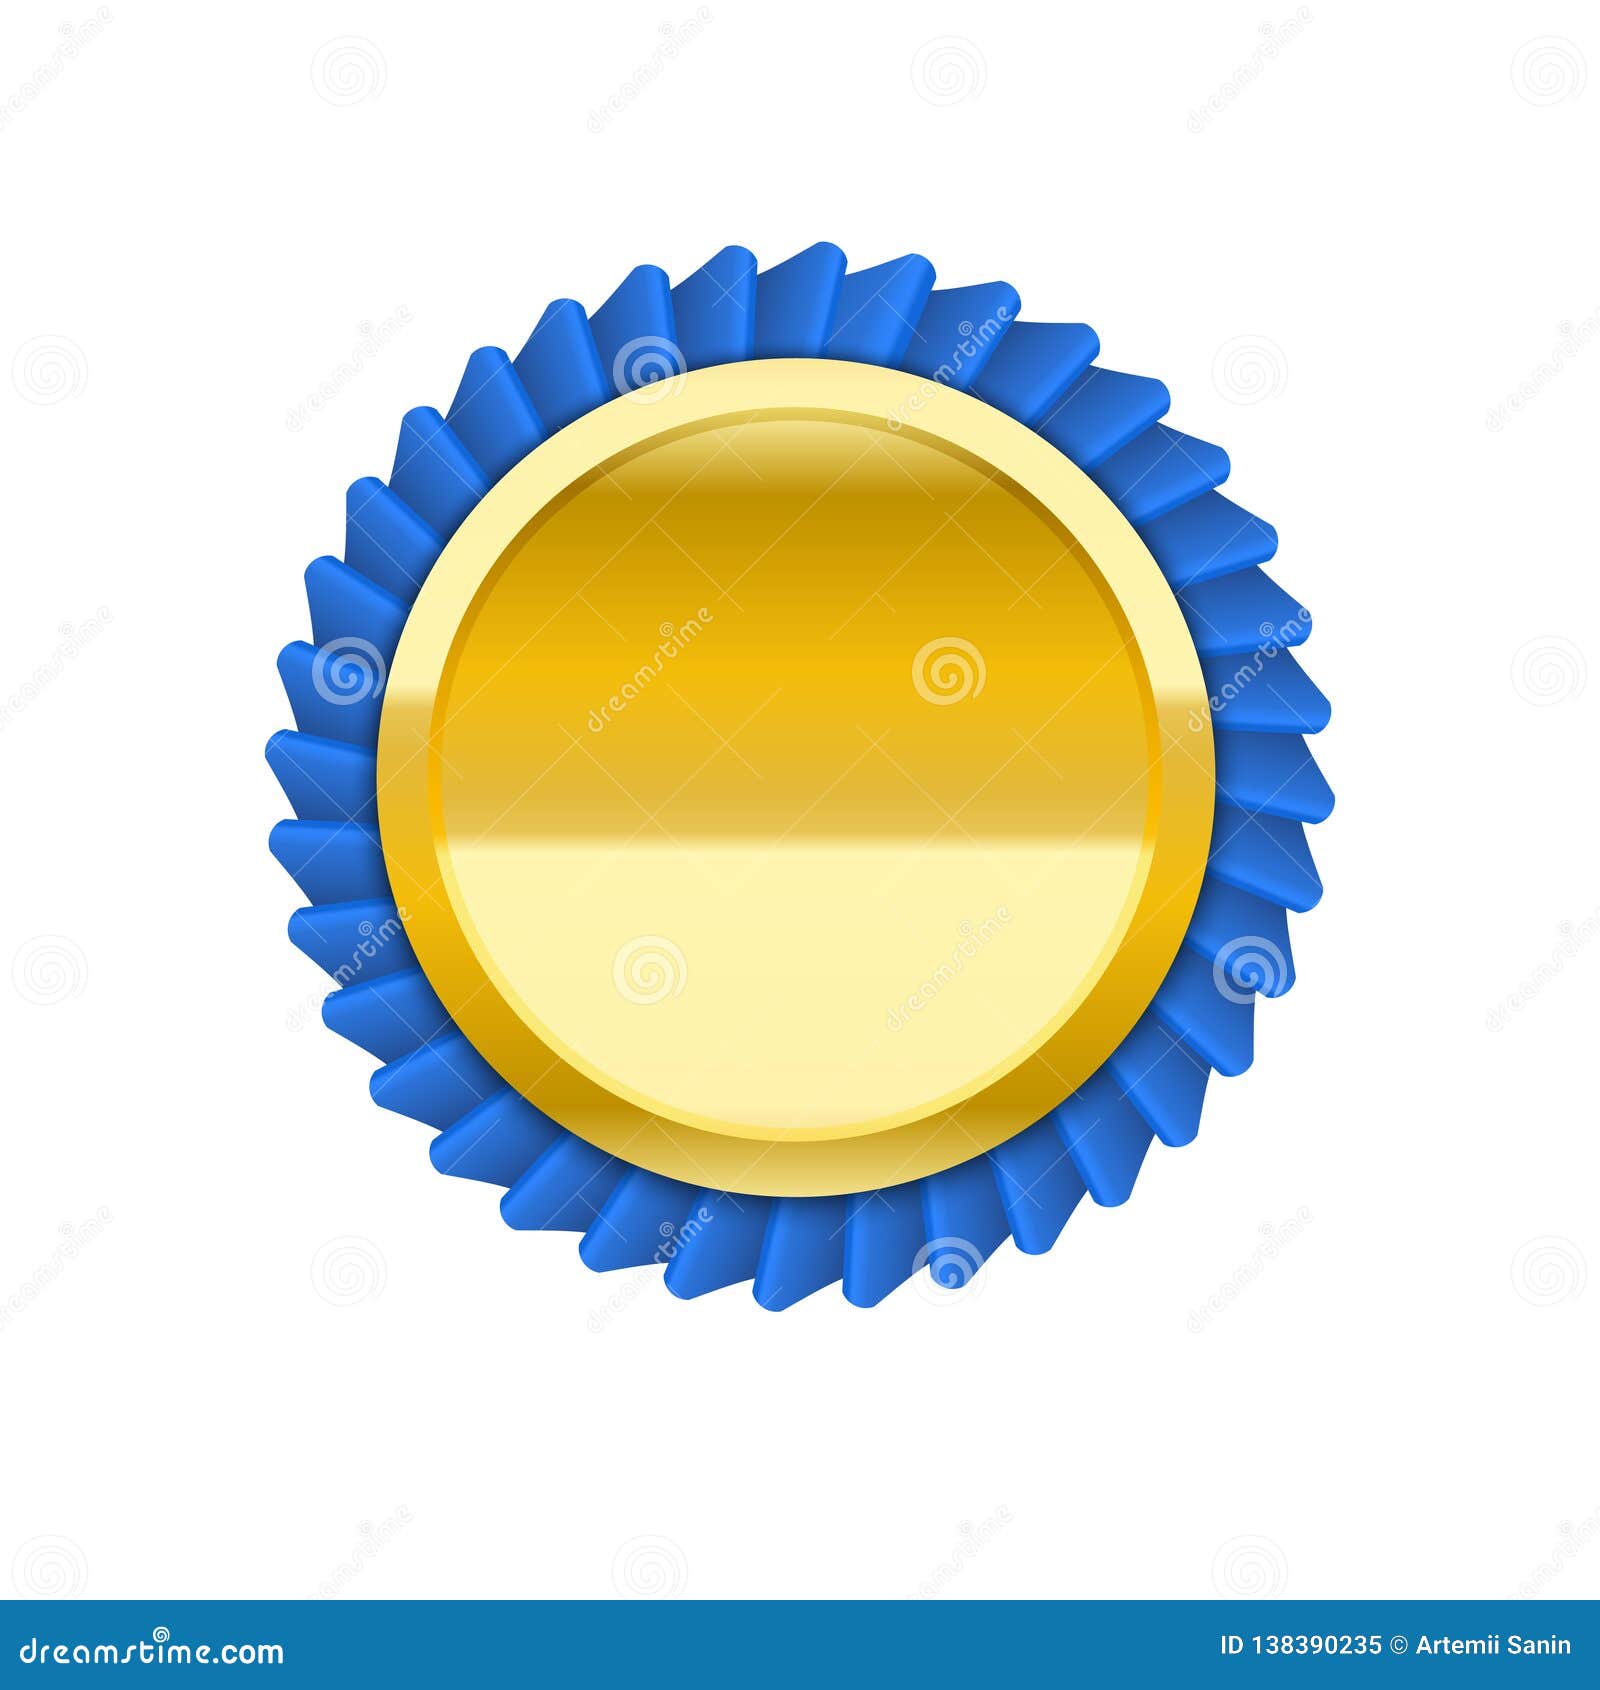 The Blue Golden Badge Medal Vector Illustration With Red Ribbon Stock